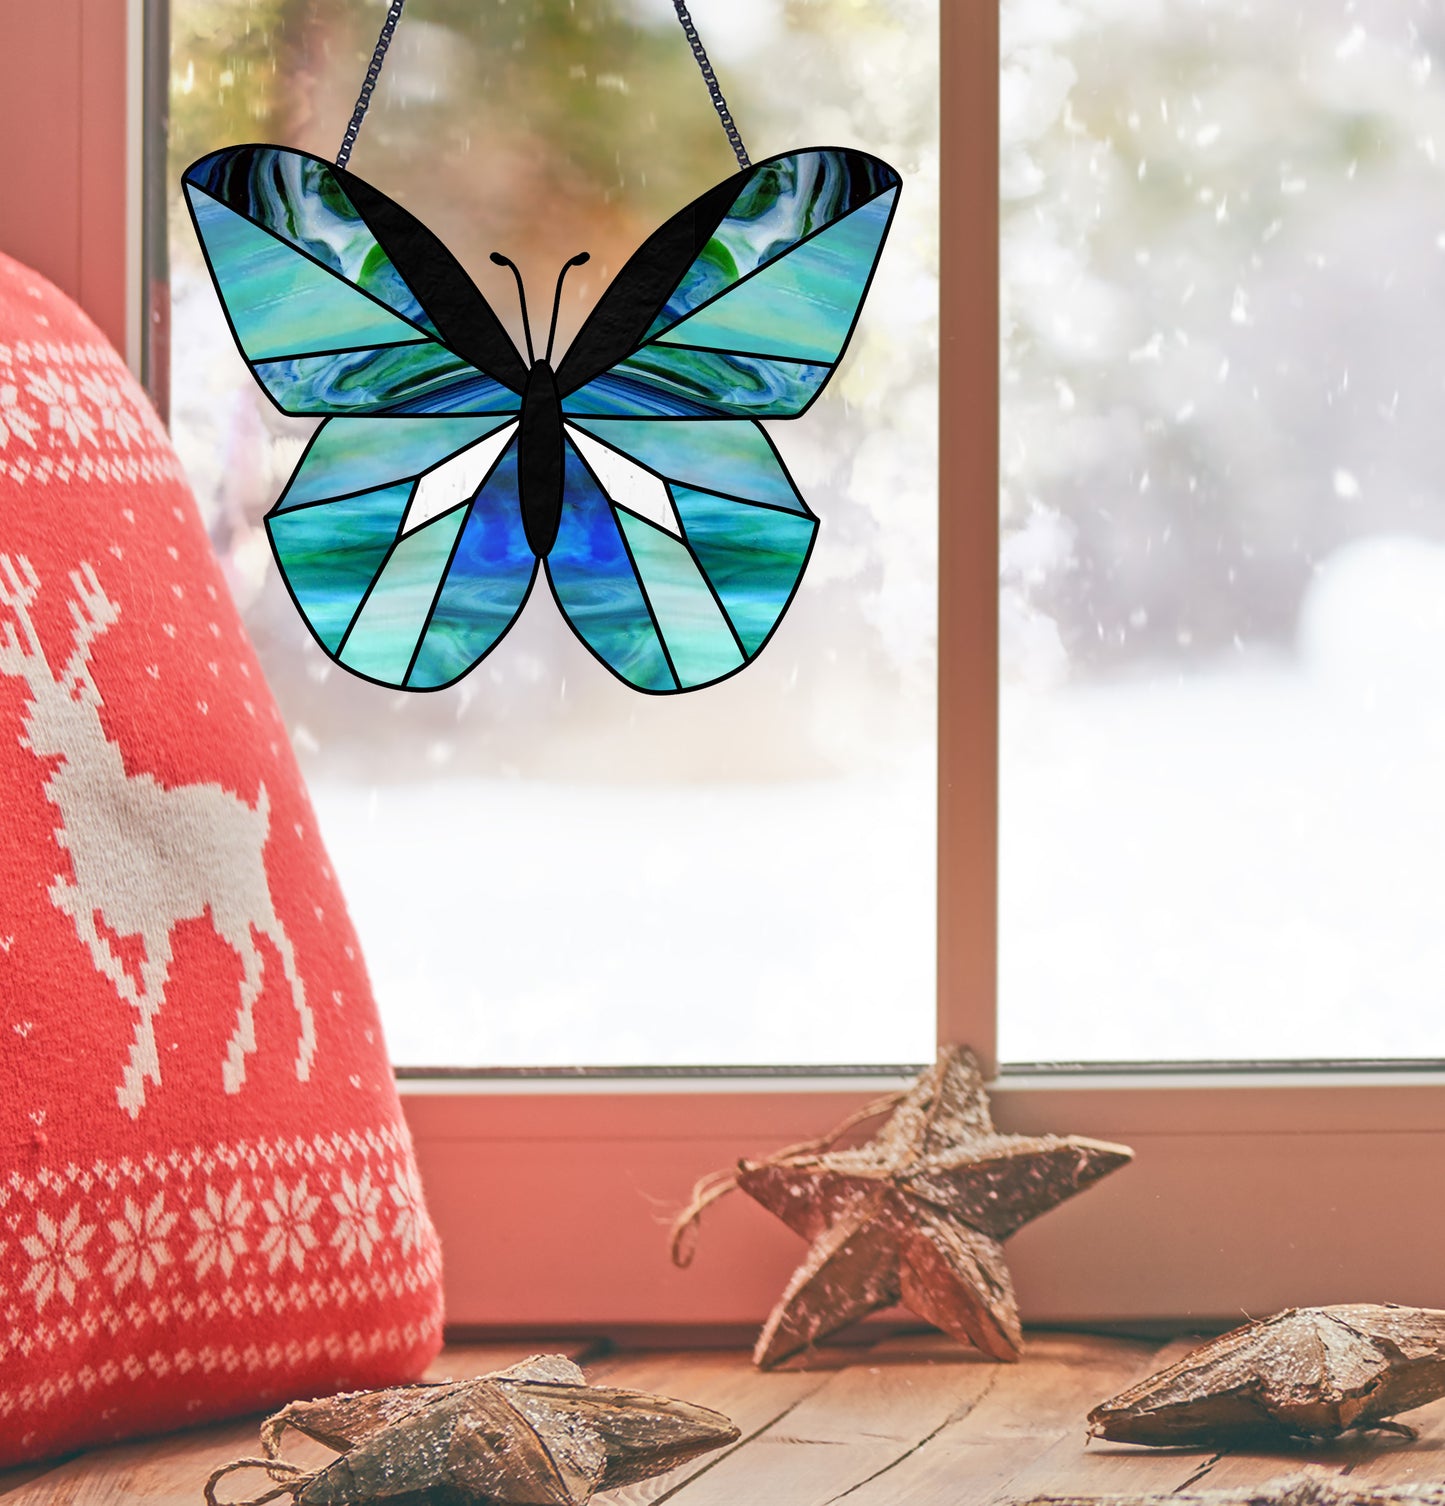 Beginner stained glass pattern for a butterfly, instant PDF download, shown hanging in a window with Christmas decorations